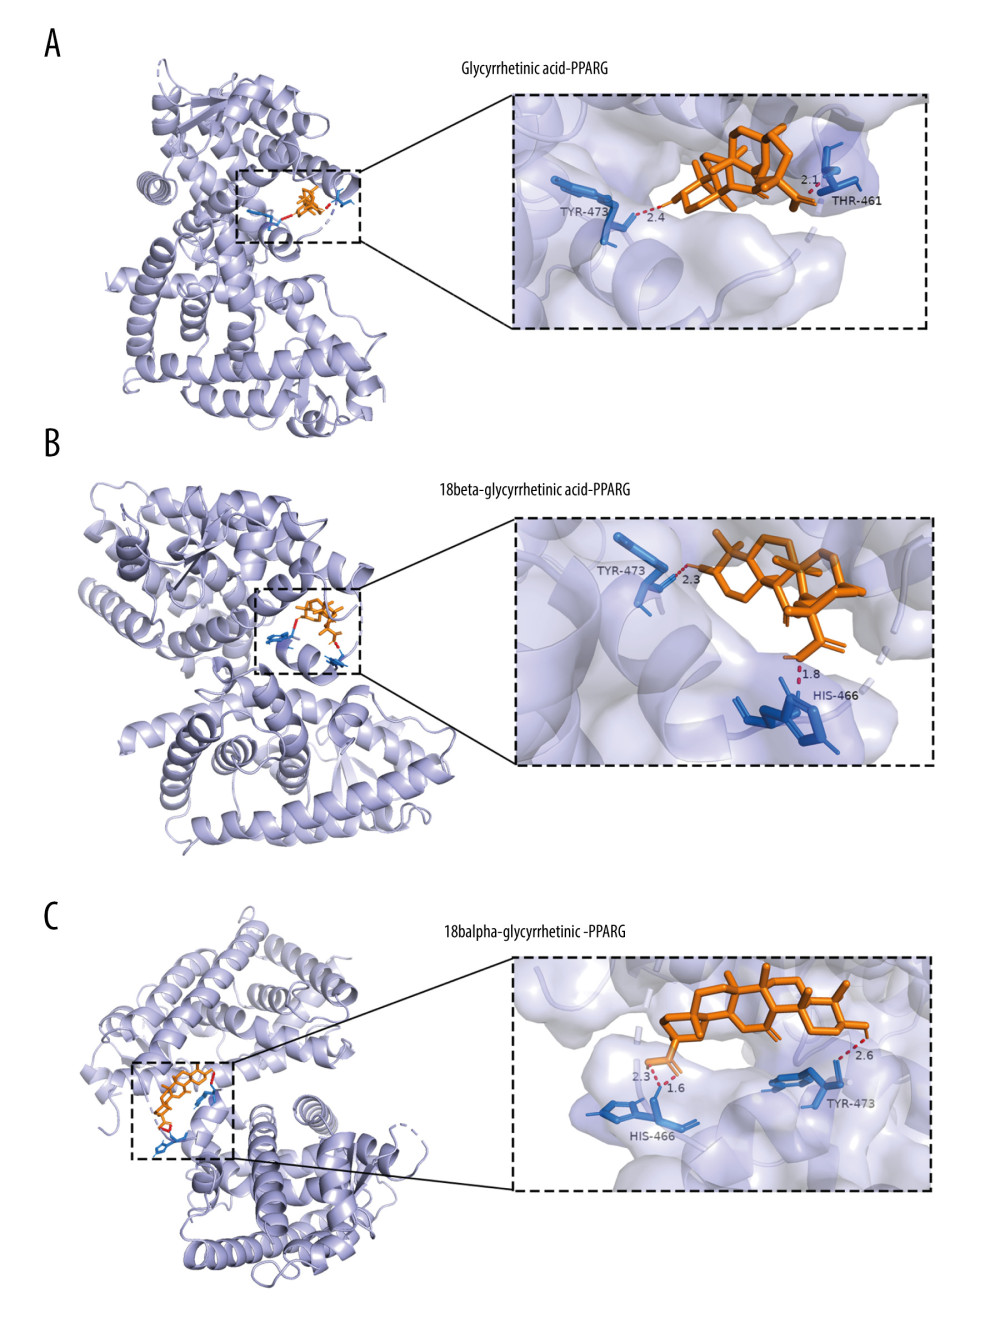 Molecular docking models of glycyrrhetinic acid (A), 18beta-glycyrrhetinic acid (B), and 18alpha-glycyrrhetinic (C) binding to PPARG by AutoDock 4.2 softwarePurple, orange, red, and blue represent protein receptor, small drug ligand, hydrogen bond, and amino acid residue, respectively. The length of bond is added to the bond.